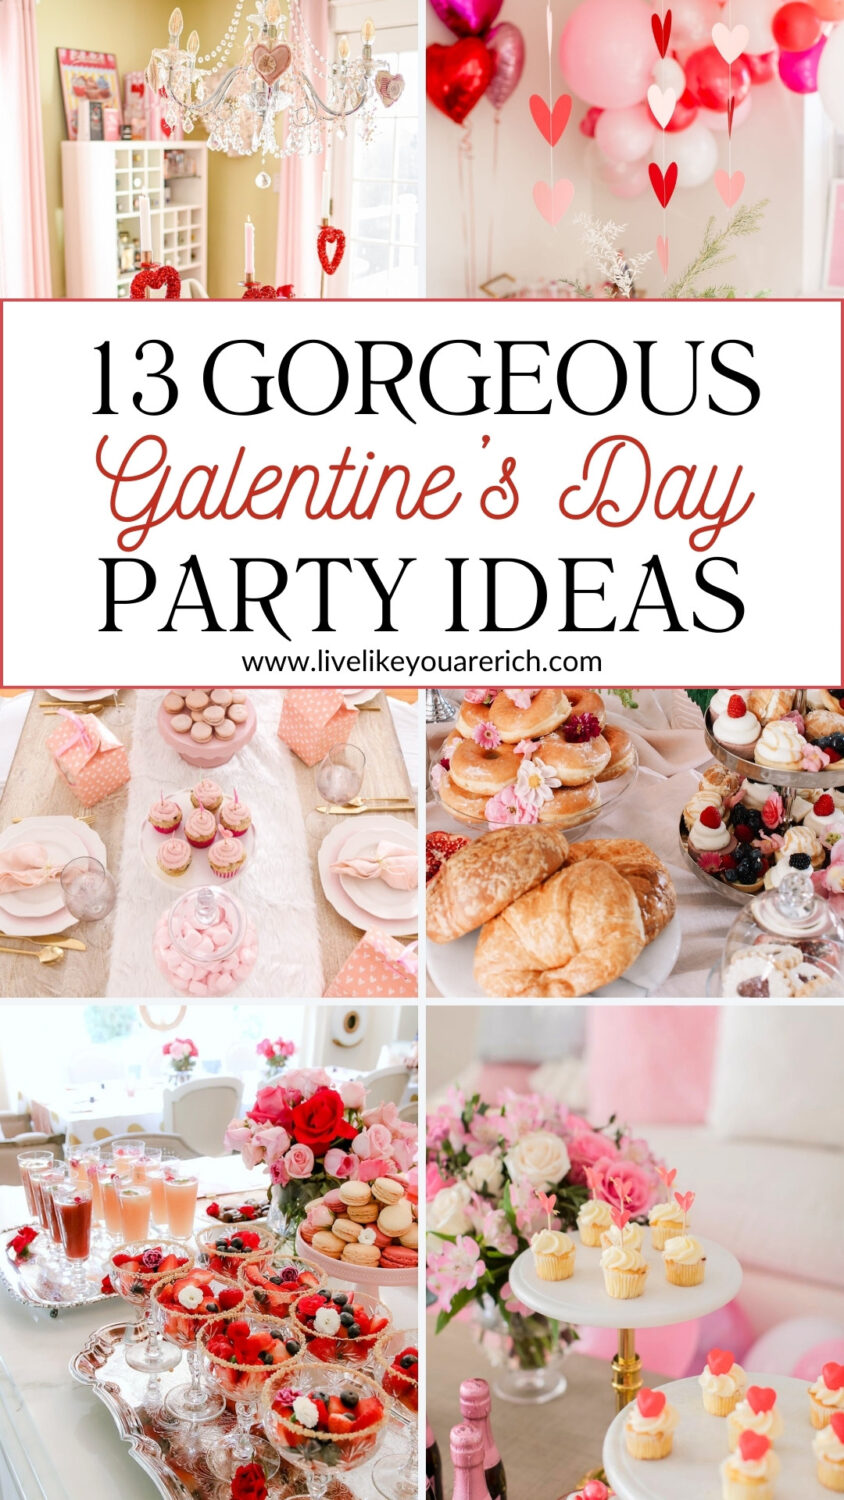 13 Gorgeous Galentine's Day Party Ideas